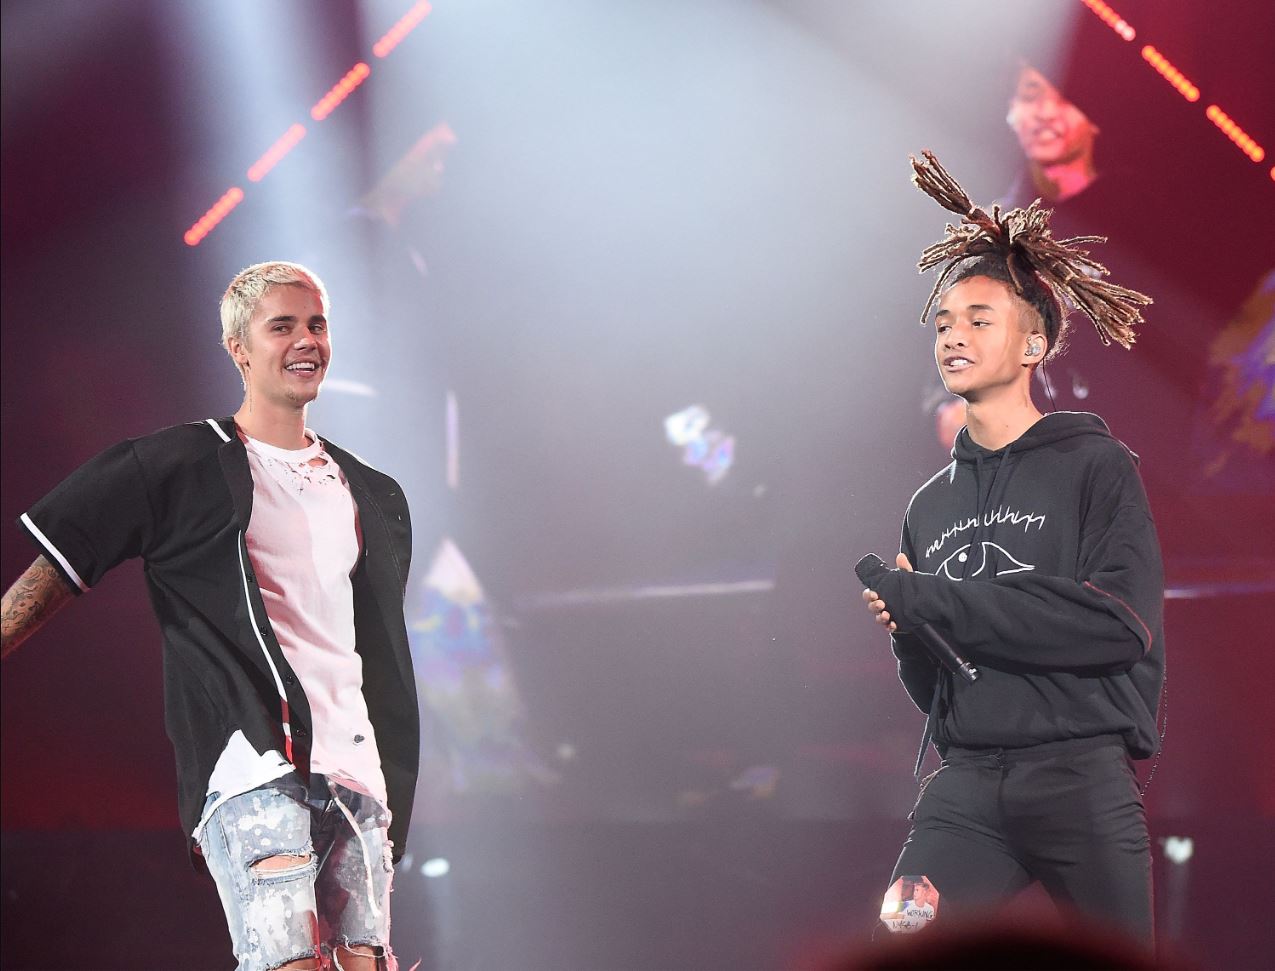  Justin Bieber's Height and Jaden Smith